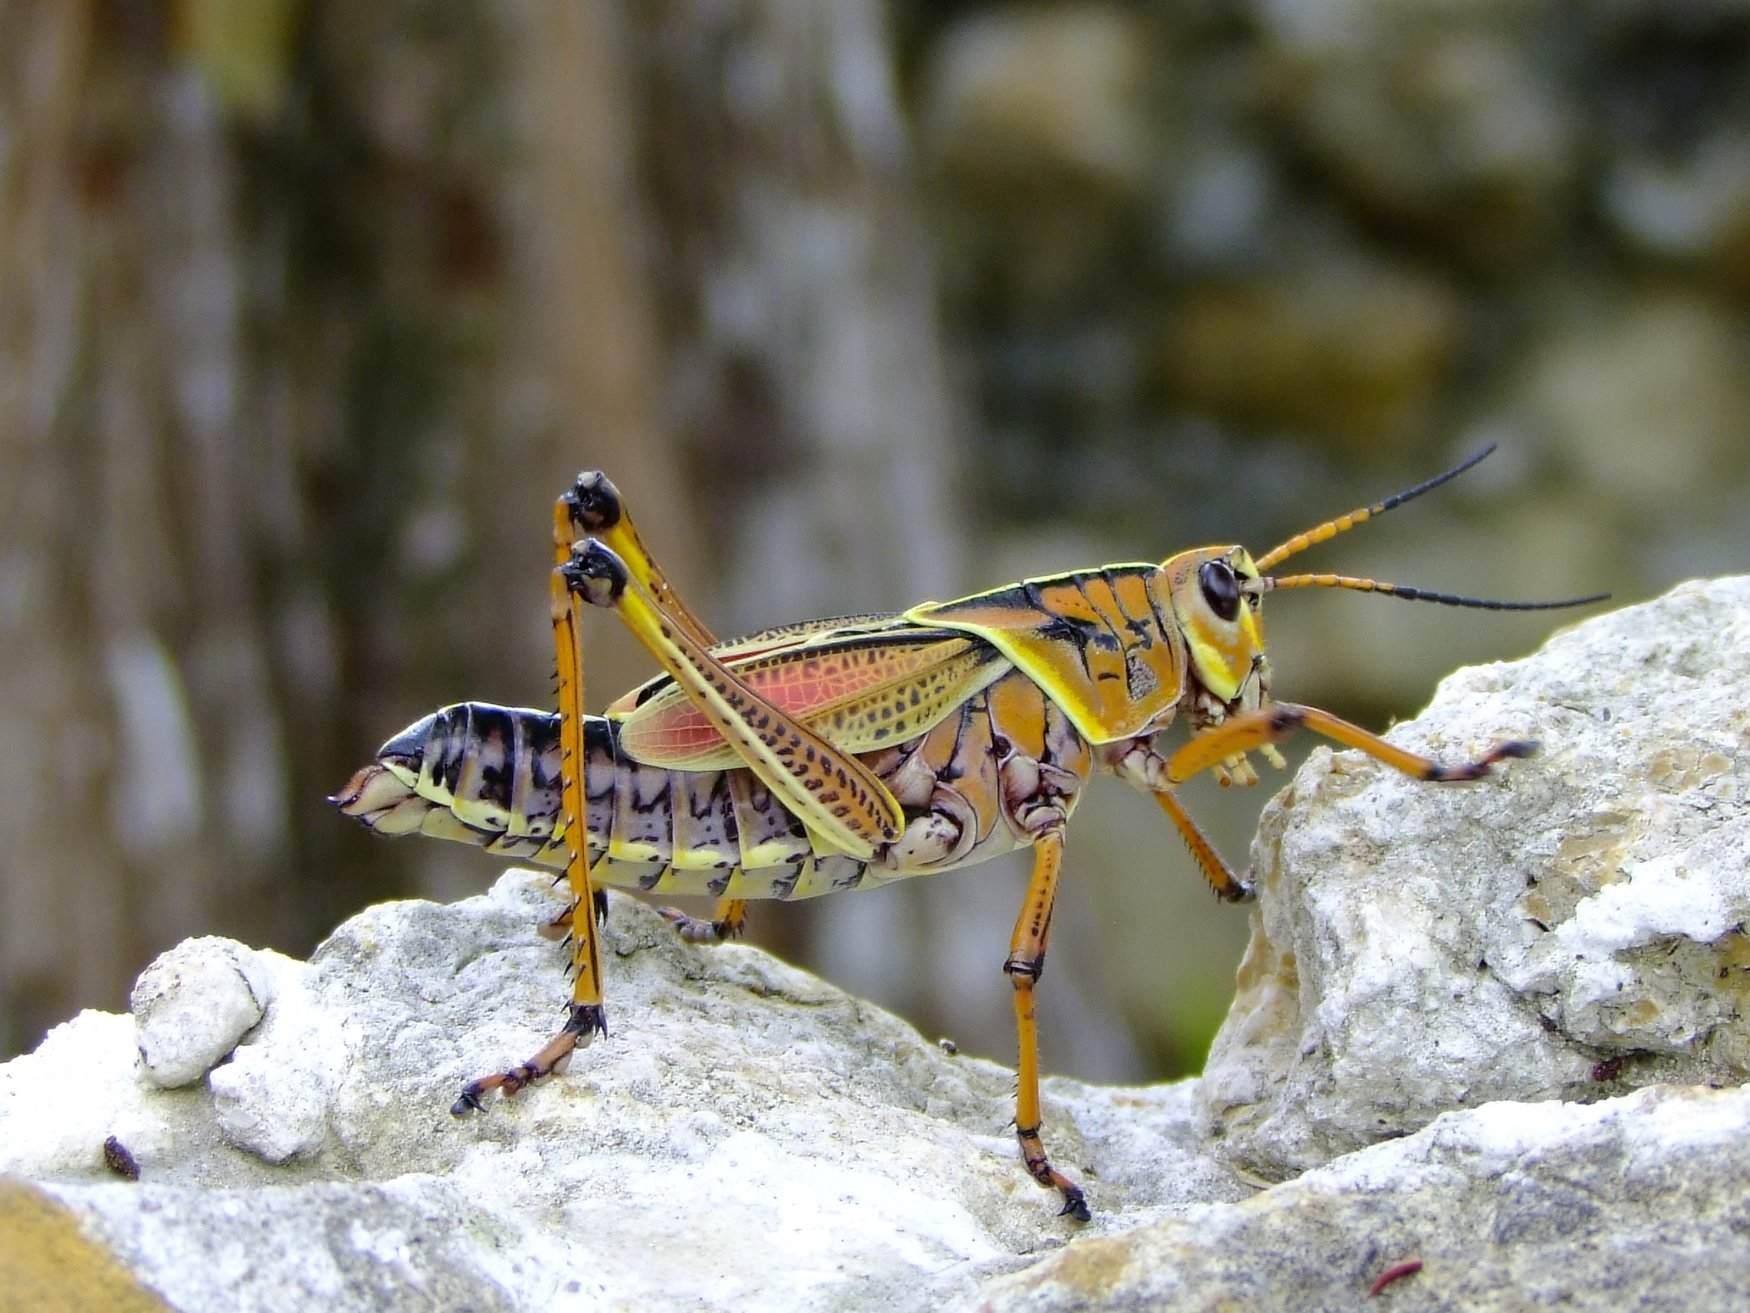 Lubber Grasshopper - Insects, Arachnids, Reptiles & Amphibians, Insect | Florida | Everglades | Yellow | Fly